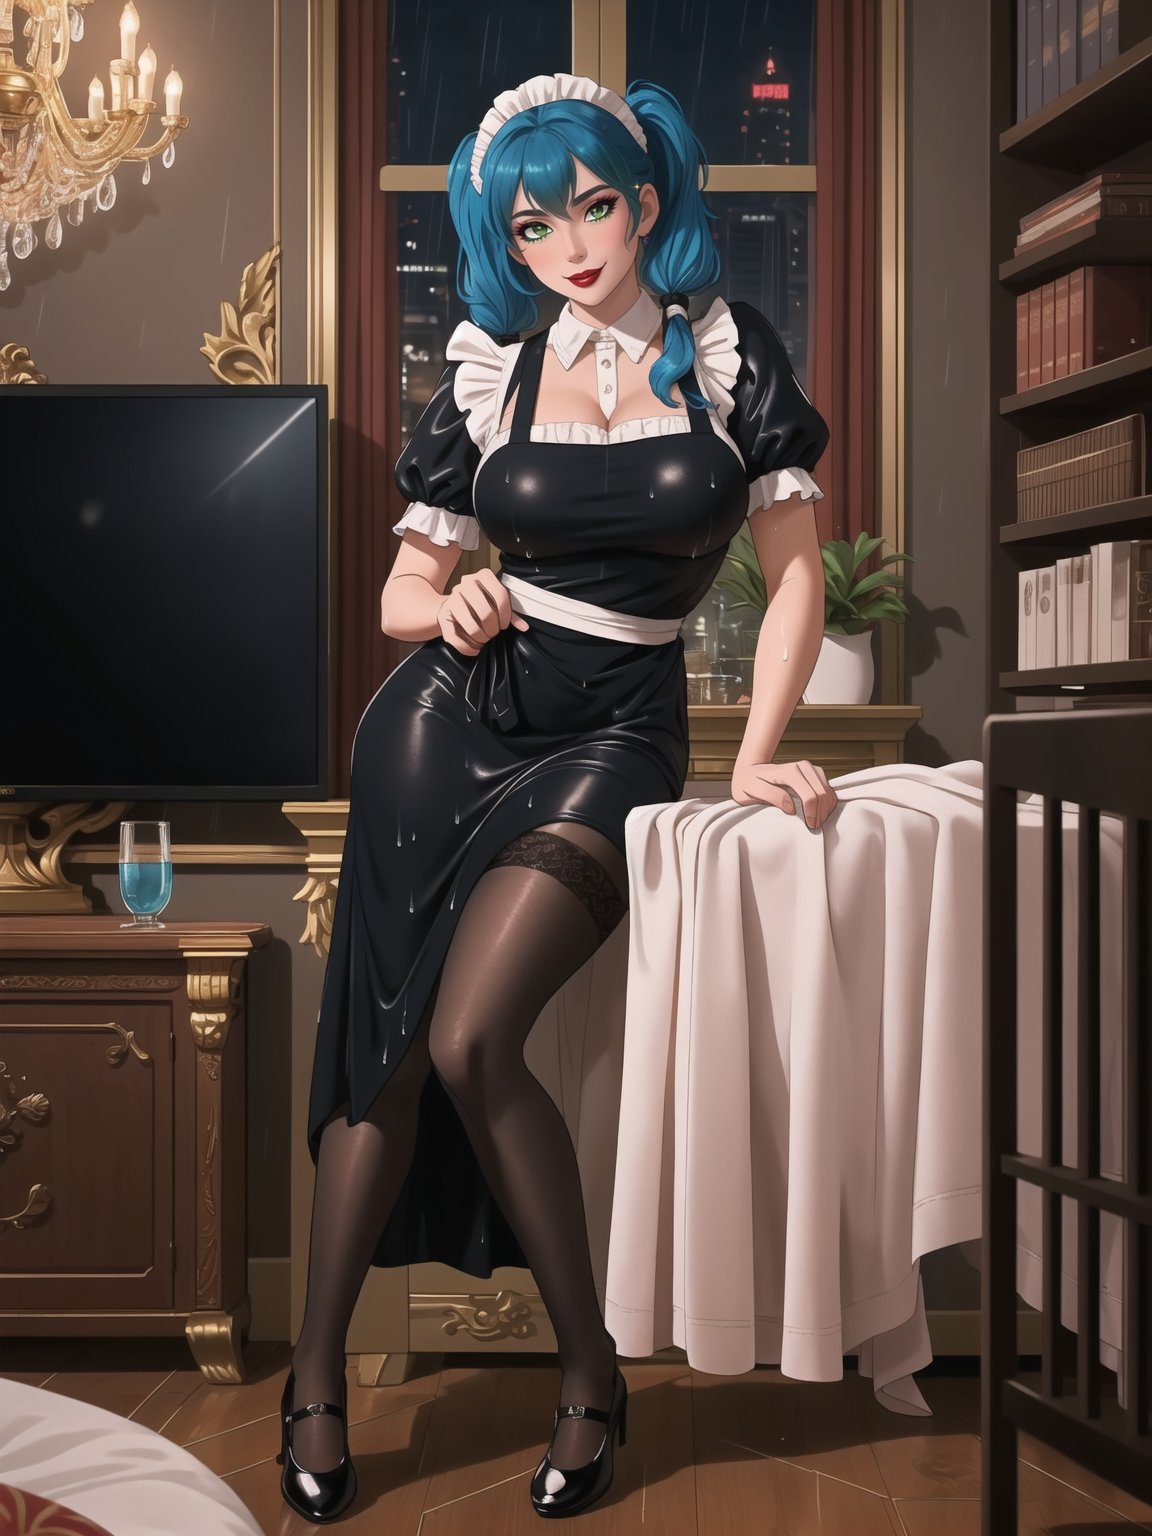 High resolution in 4K, inspired by urban surrealism with touches of classic elegance. | The housekeeper, a beautiful 30-year-old woman, works boldly and sensually. Dressed in a black maid outfit with a white apron, lycra stockings, and black flat shoes, she stares directly at the viewer with her long, blue hair tied in two pigtails with metallic clips, adding a playful touch to her appearance. Her entire body and clothing are wet from water, giving a bold look to the scene. | The setting is in a large and luxurious apartment, filled with elegant furniture and marble structures. A glass dining table, a bookshelf with a 90-inch television, and a window overlooking the rainy city at night make up the scene. The housekeeper, with a bold attitude, interacts with imposing structures, leaning on them and adopting sensual poses, creating a provocative and unique dynamic. | A 30-year-old housekeeper with a blend of urban surrealism and classic elegance, working boldly and sensually in a luxurious apartment during a rainy night. | She is striking a ((sensual pose while interacting, boldly leaning on a large structure in the scene. Elegantly leaning against, it adds a unique touch to the scene.):1.2), ((Full body image)), perfect hand, fingers, hand, perfect, better_hands, More Detail,